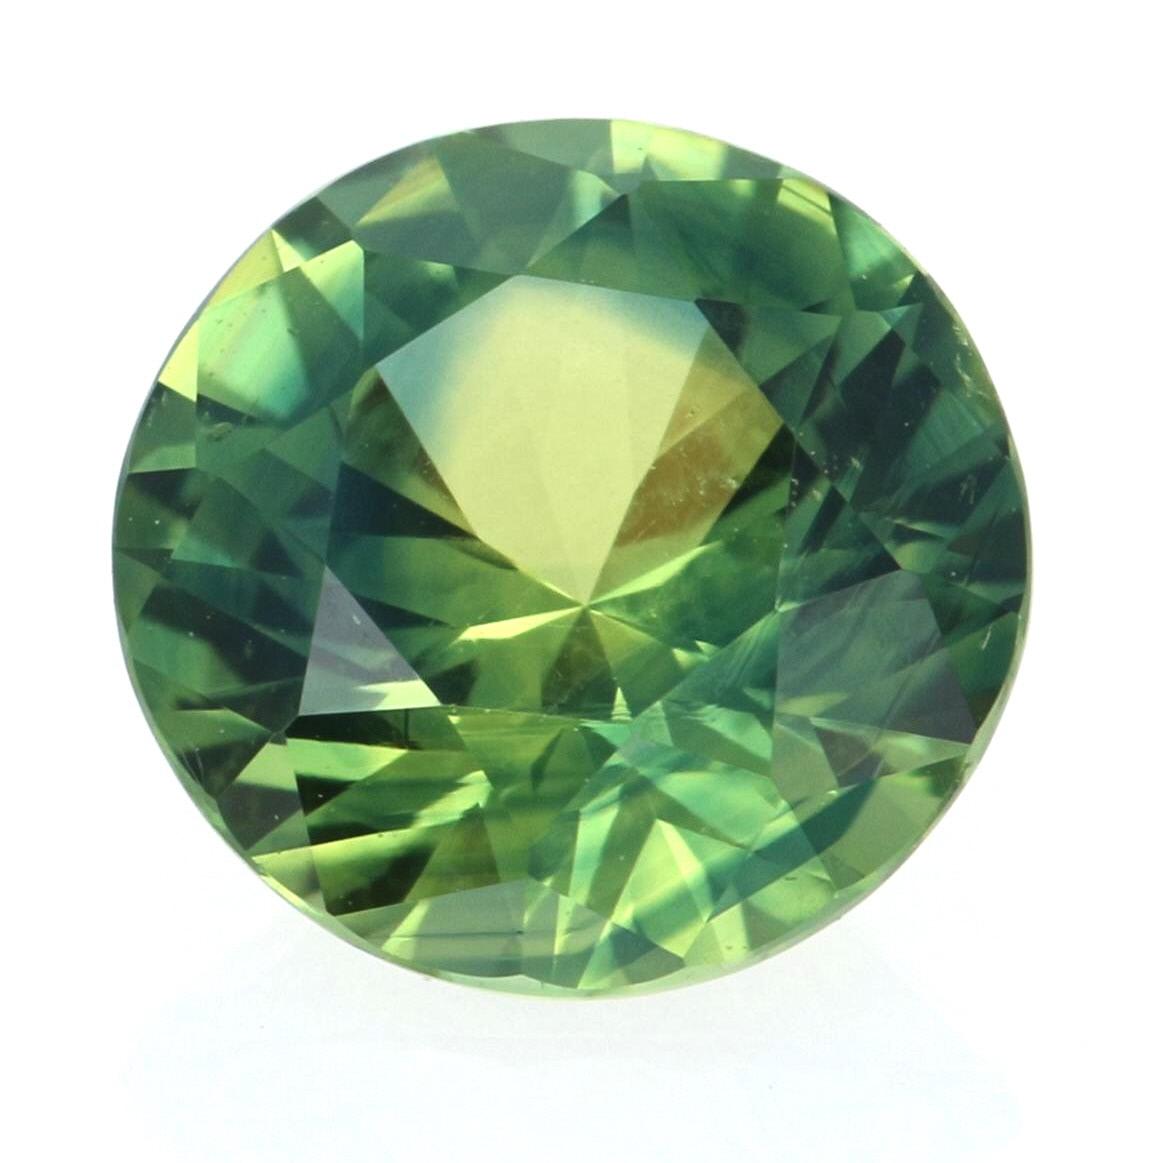 Weight: 1.45ct
Treatment: Heating
Cut: Round Brilliant 
Color: Bluish Yellowish Green   
Dimensions (mm): 6.80 - 6.71 x 4.32 

AGL Report Number: GB 1102499 

Condition: New  

Please check out the enlarged pictures.

Thank you for taking the time